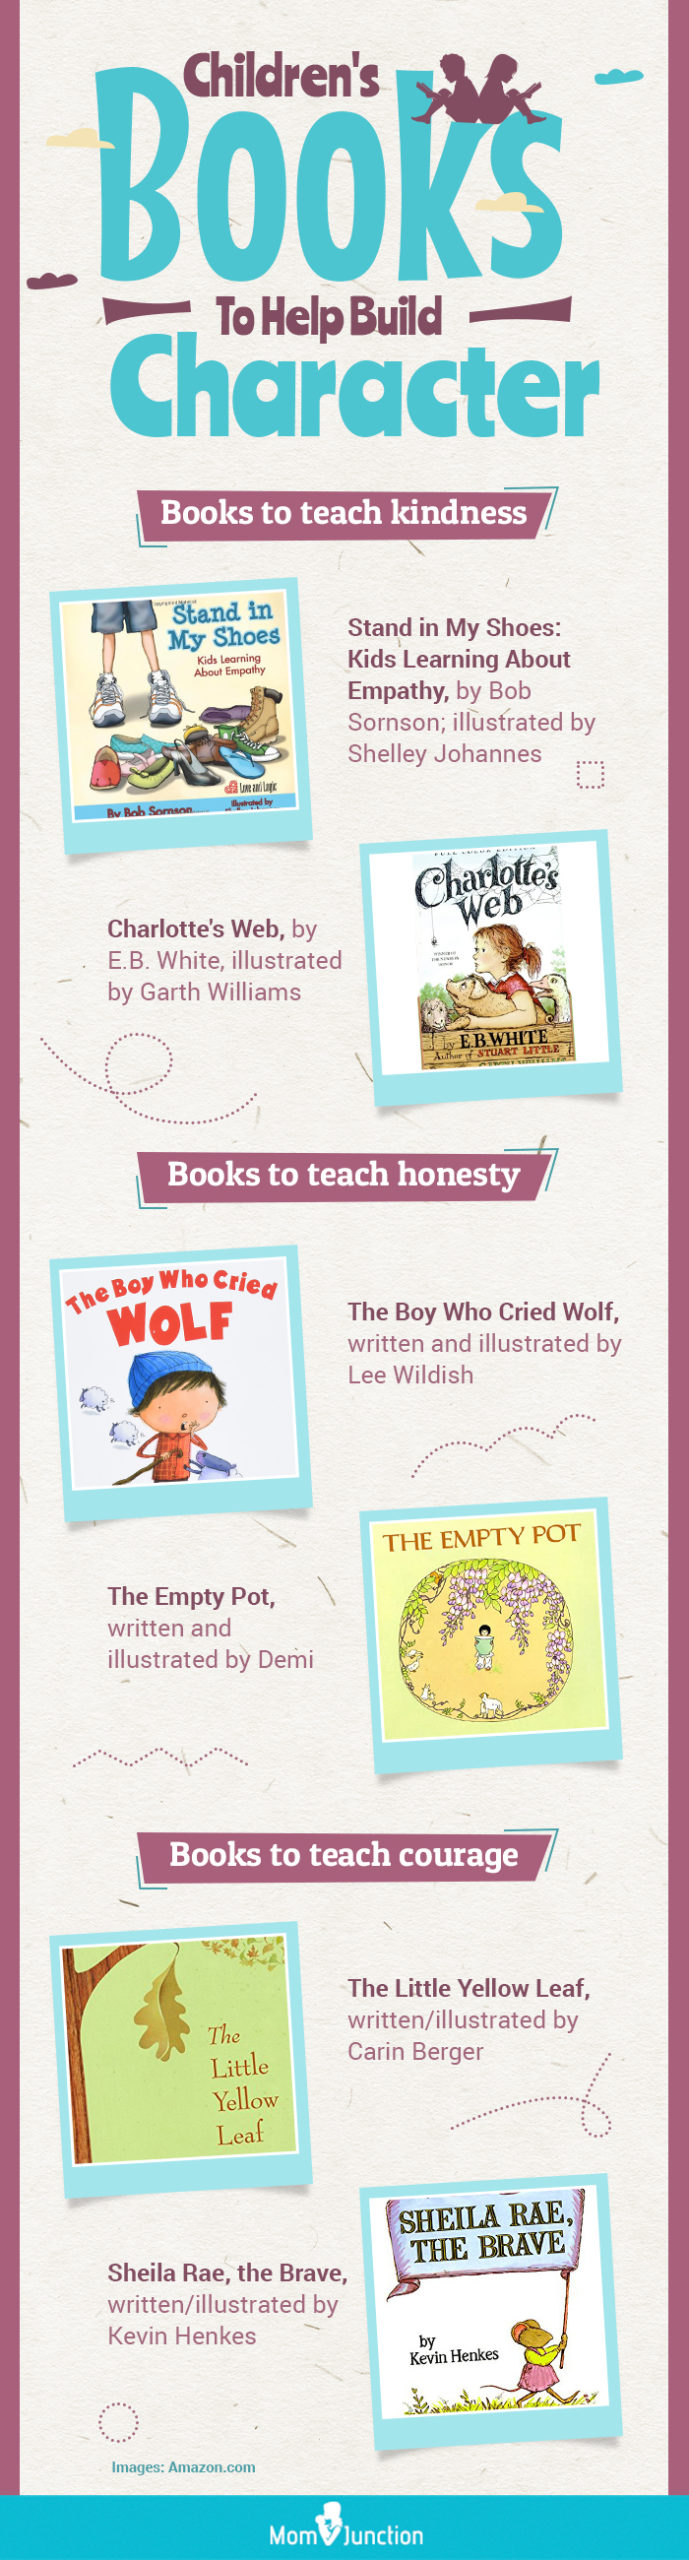 children's books to help build character(infographic)